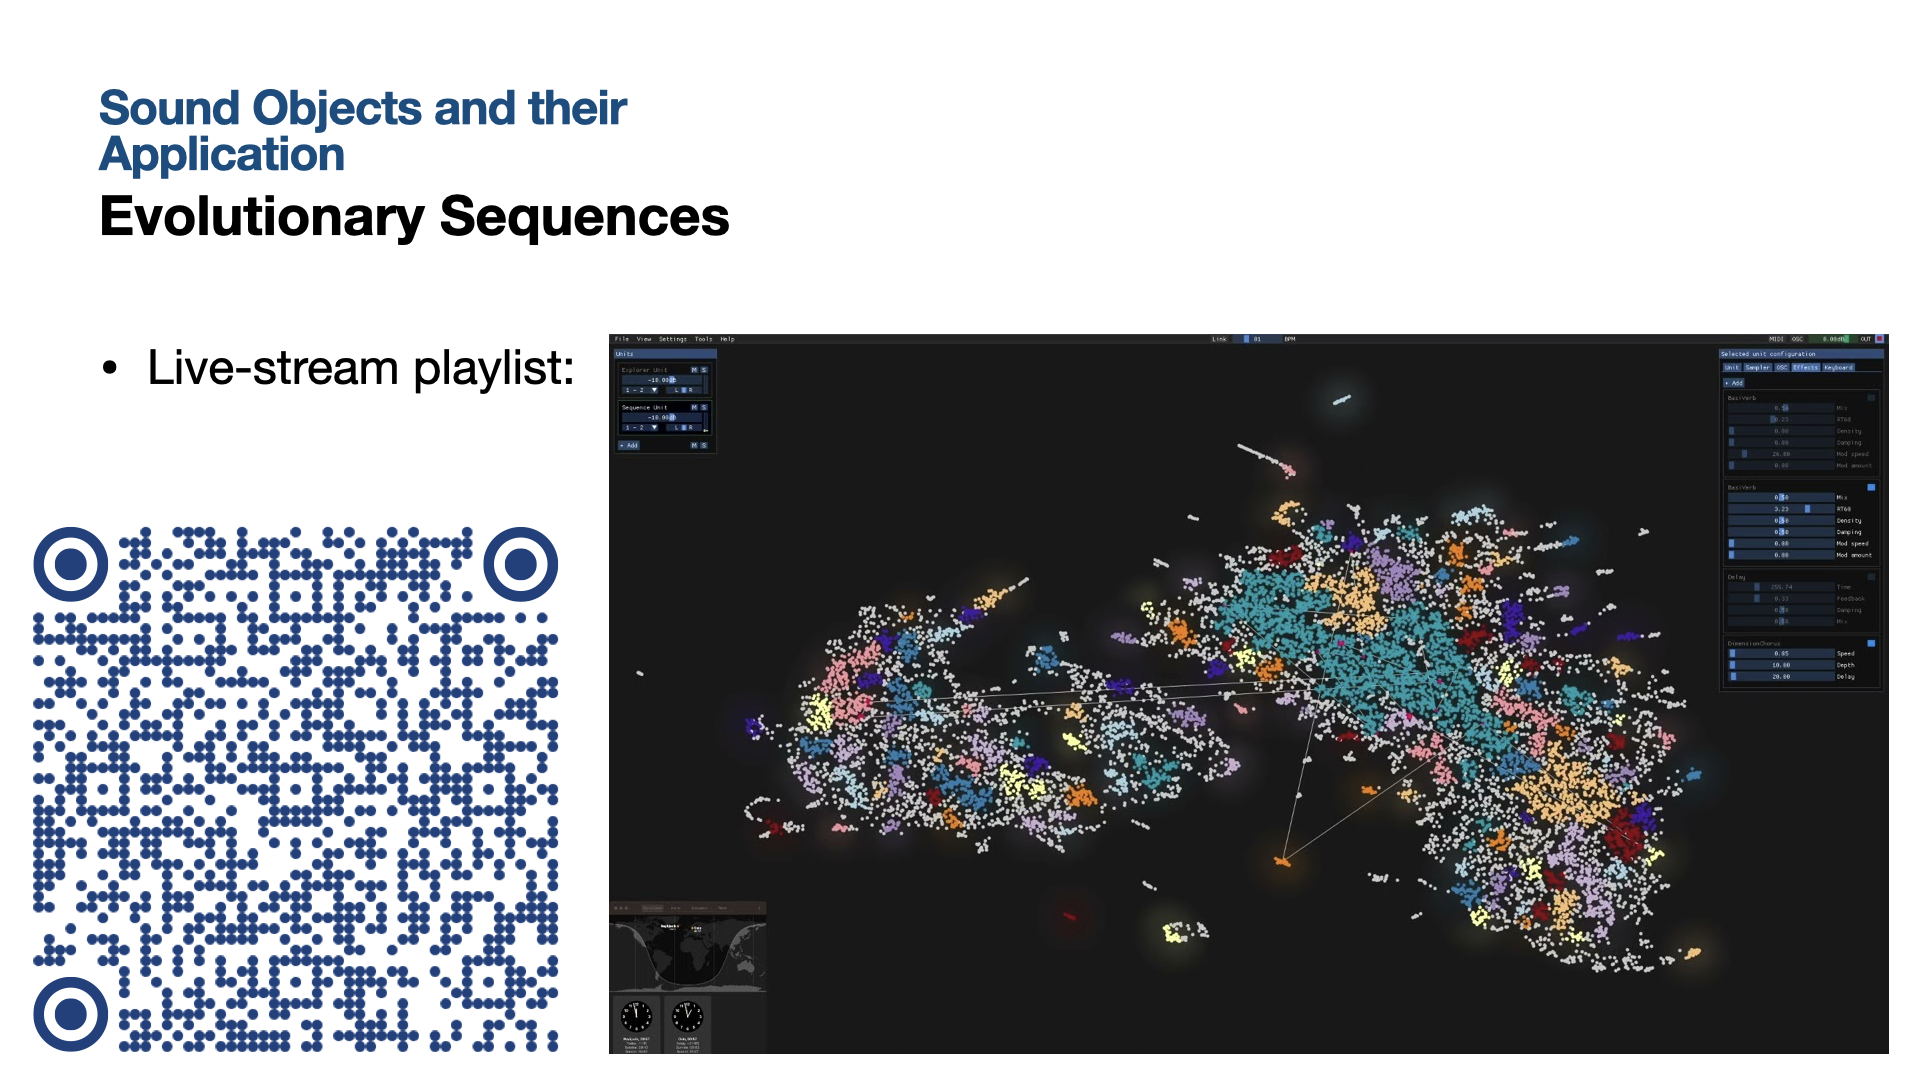 Sound Objects and their Application: Evolutionary Sequences, live-stream playlist